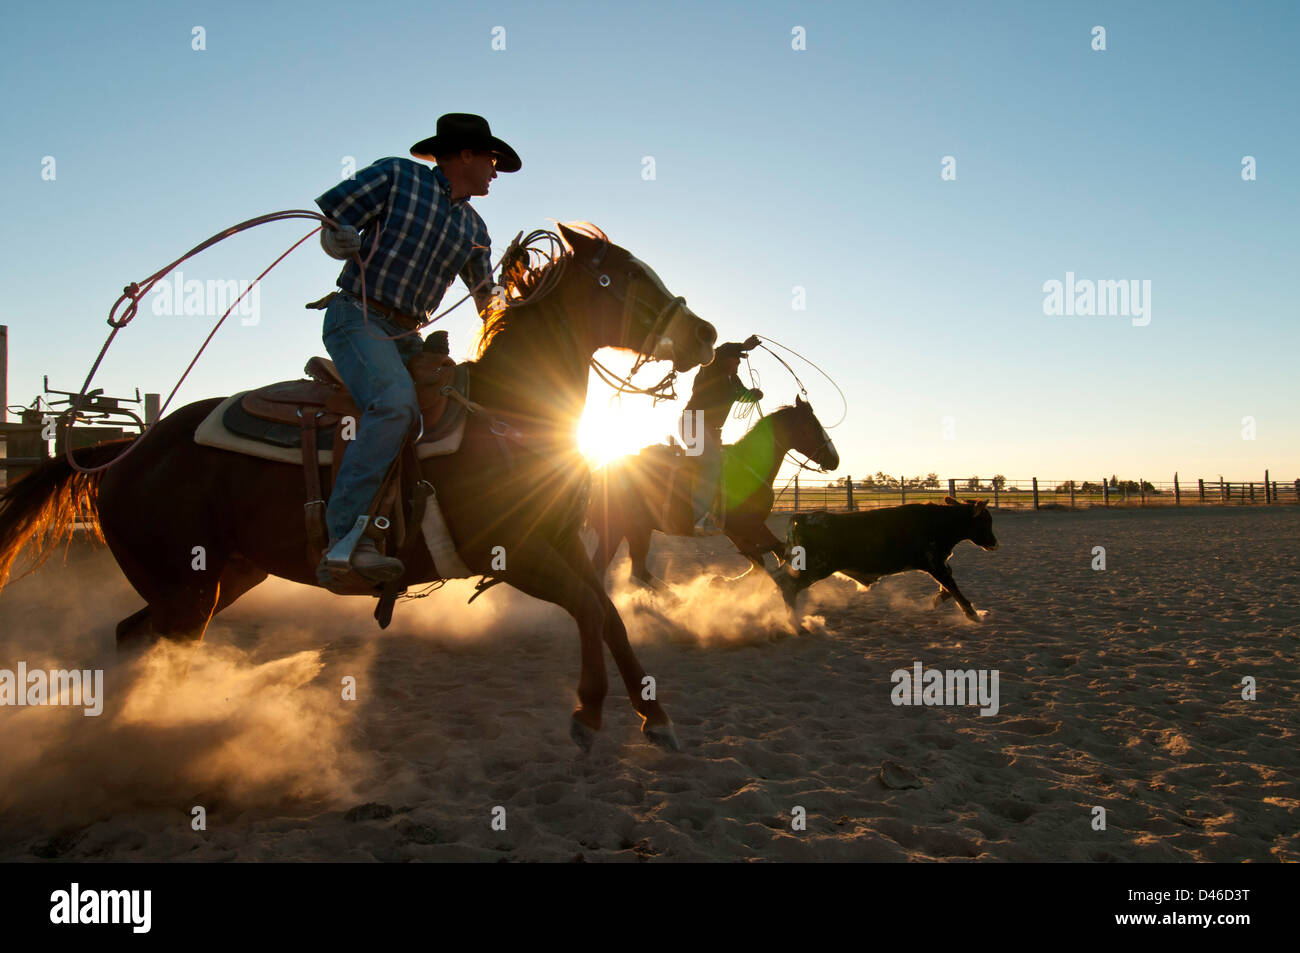 Two cowboys roping steer in a dusty arena with backlit sun rays beaming through at sunset. Twin Falls, Idaho. Stock Photo